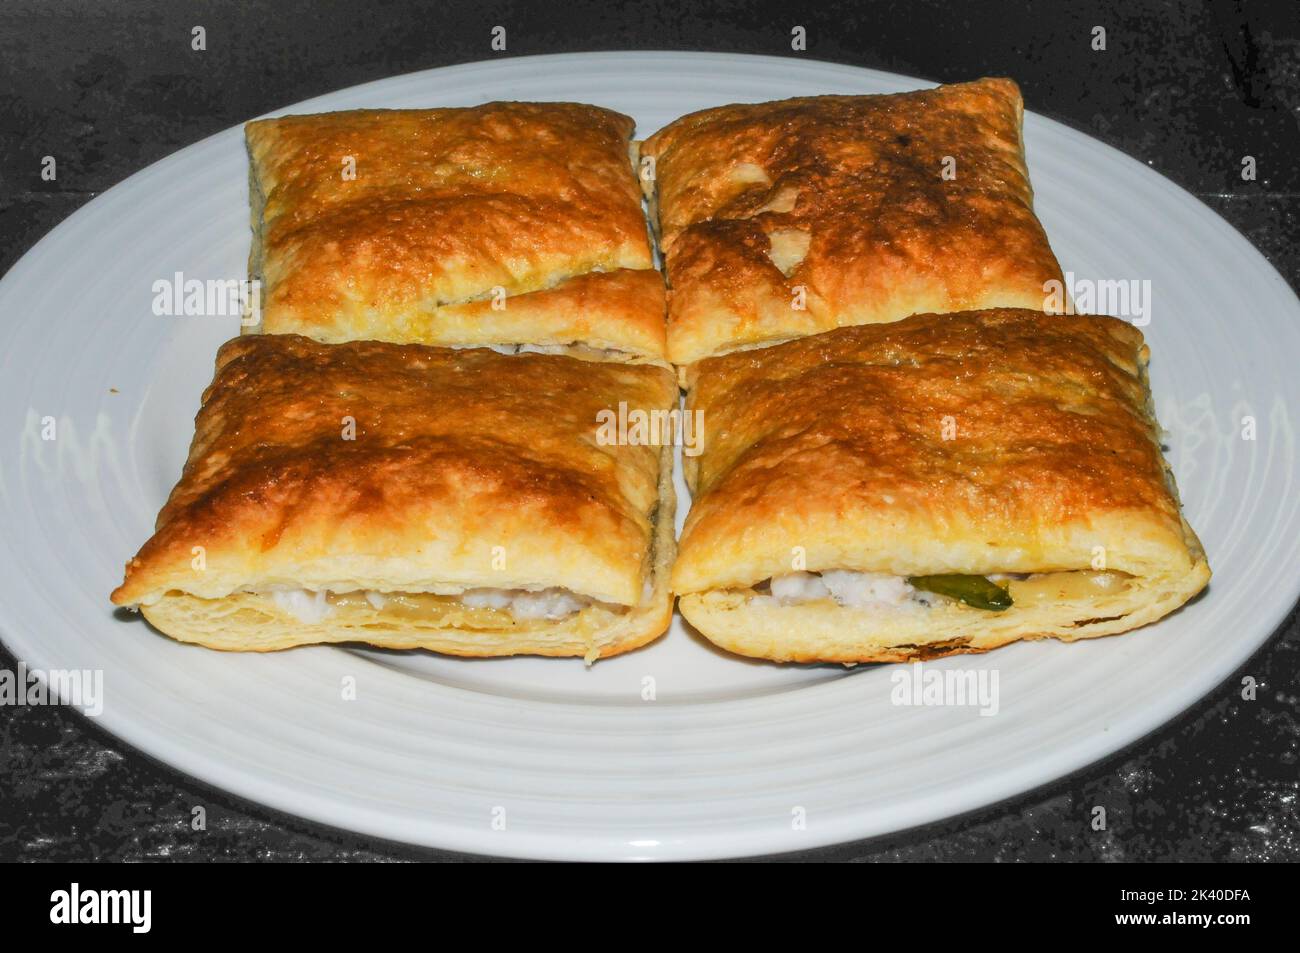 Homemade freshly baked puff pastries stuffed with hake Stock Photo